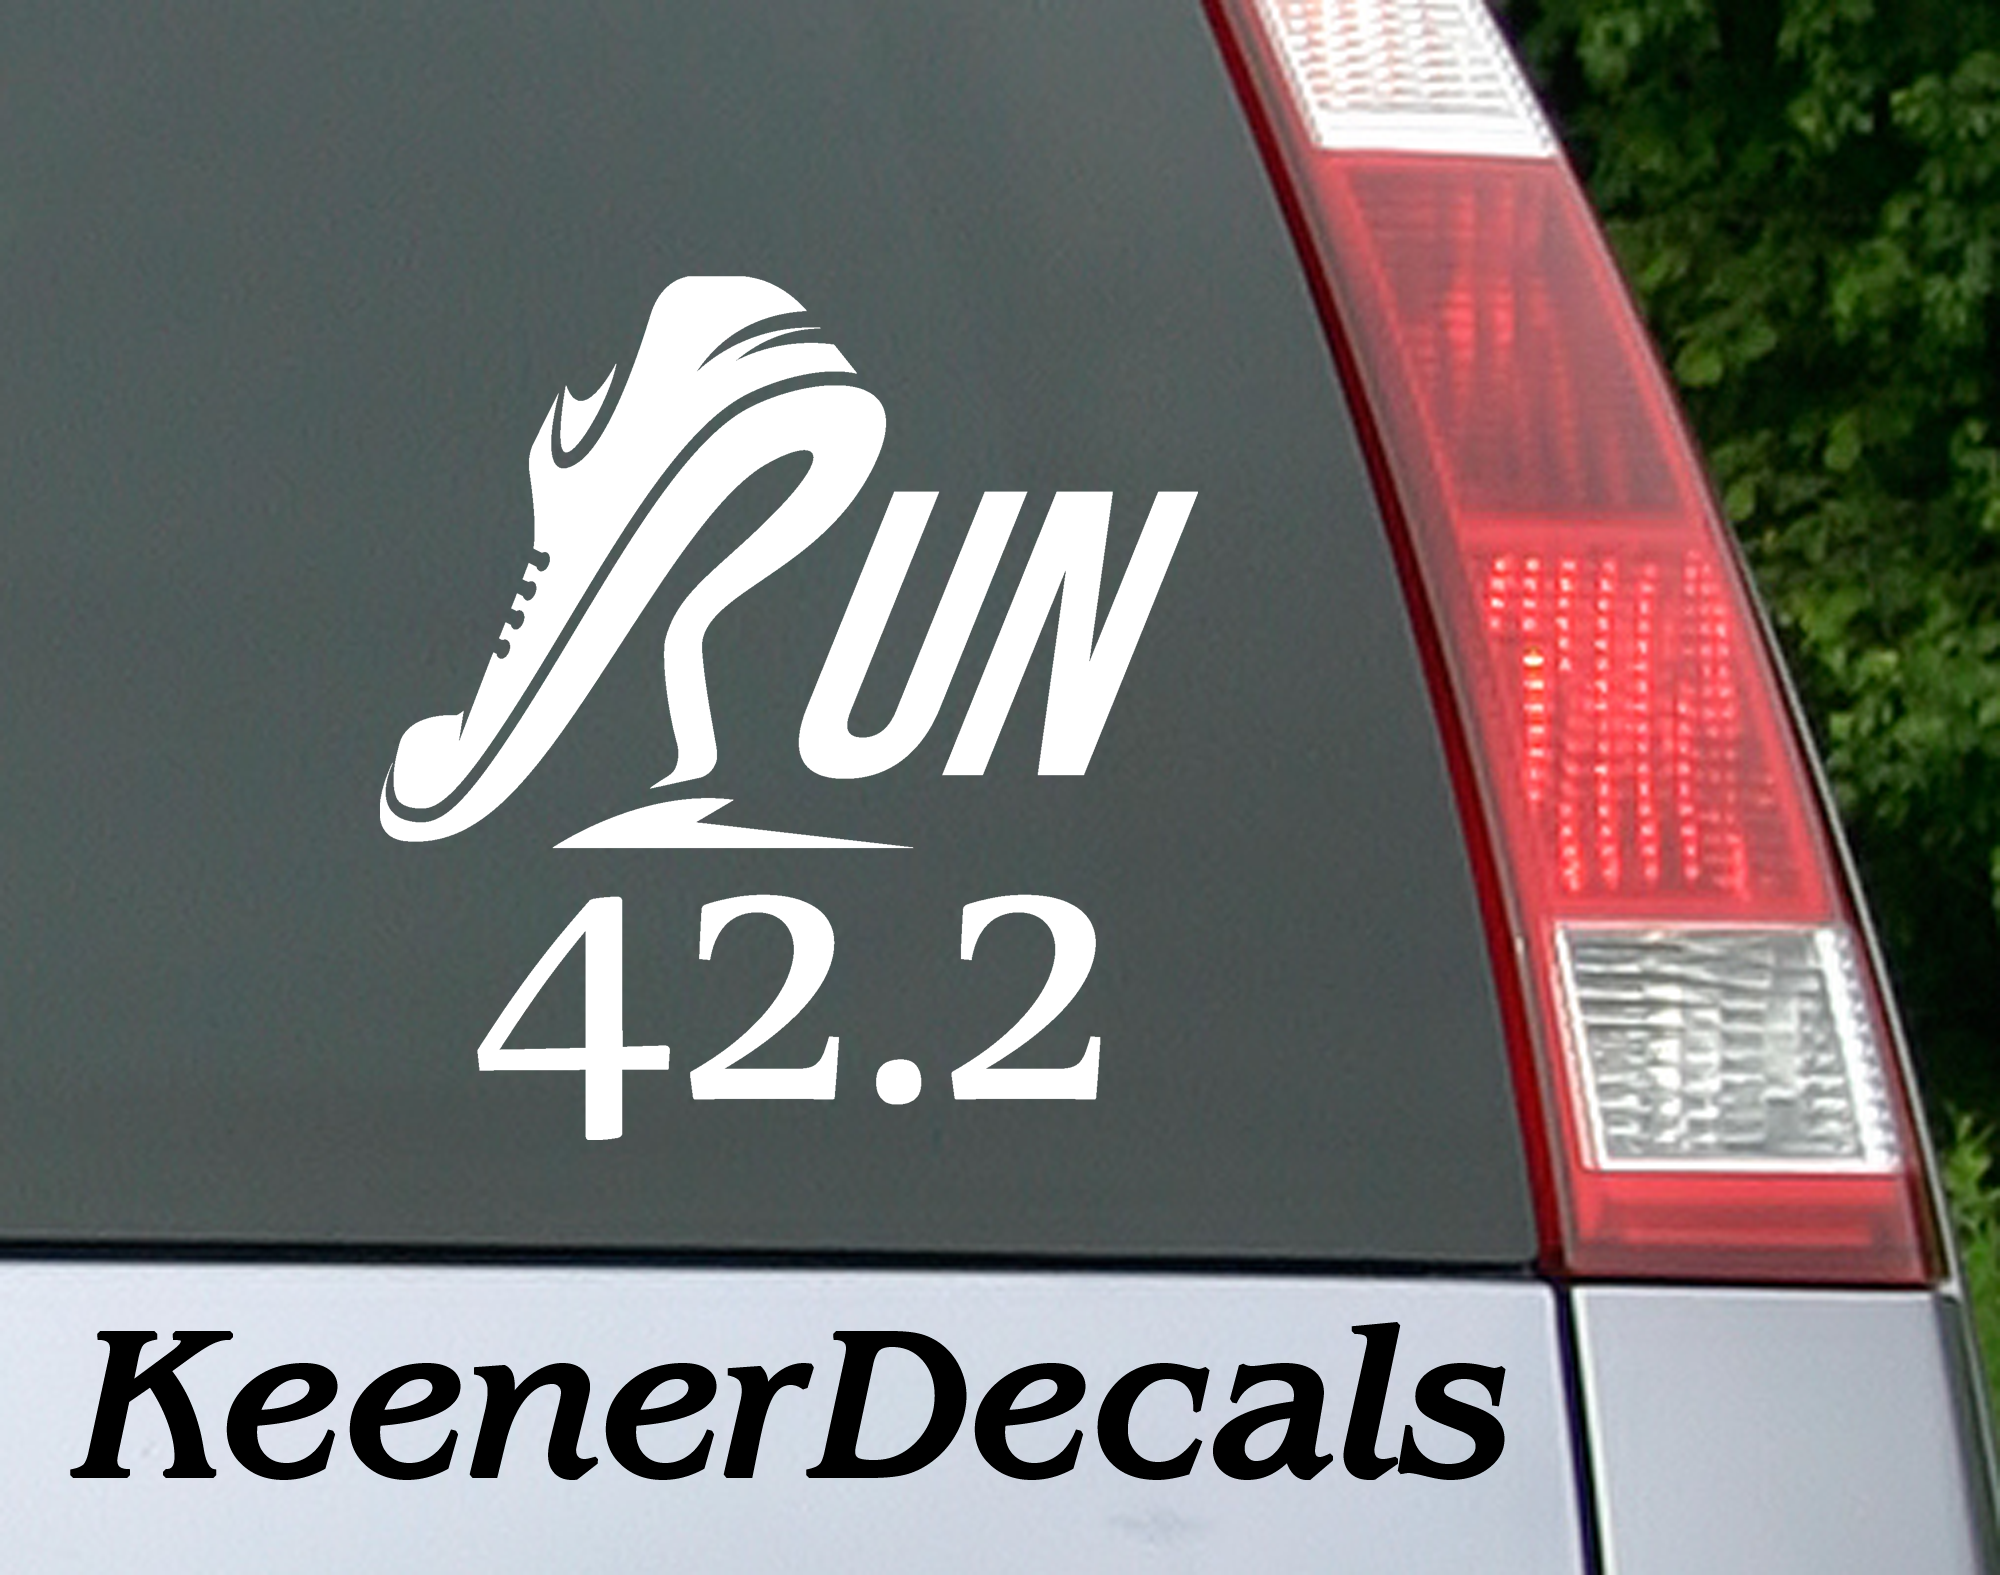 Marathon 26.2 miles or 42.2kms. Display your trophy on your car, you've earned it.  5.5"W x 5.8"H Car Decal, Car Sticker, Car Vinyl, Bumper Sticker, Vinyl Stickers, Vinyl Sticker.  FREE SHIPPING FOR ALL VINYL DECALS within Canada and the US.